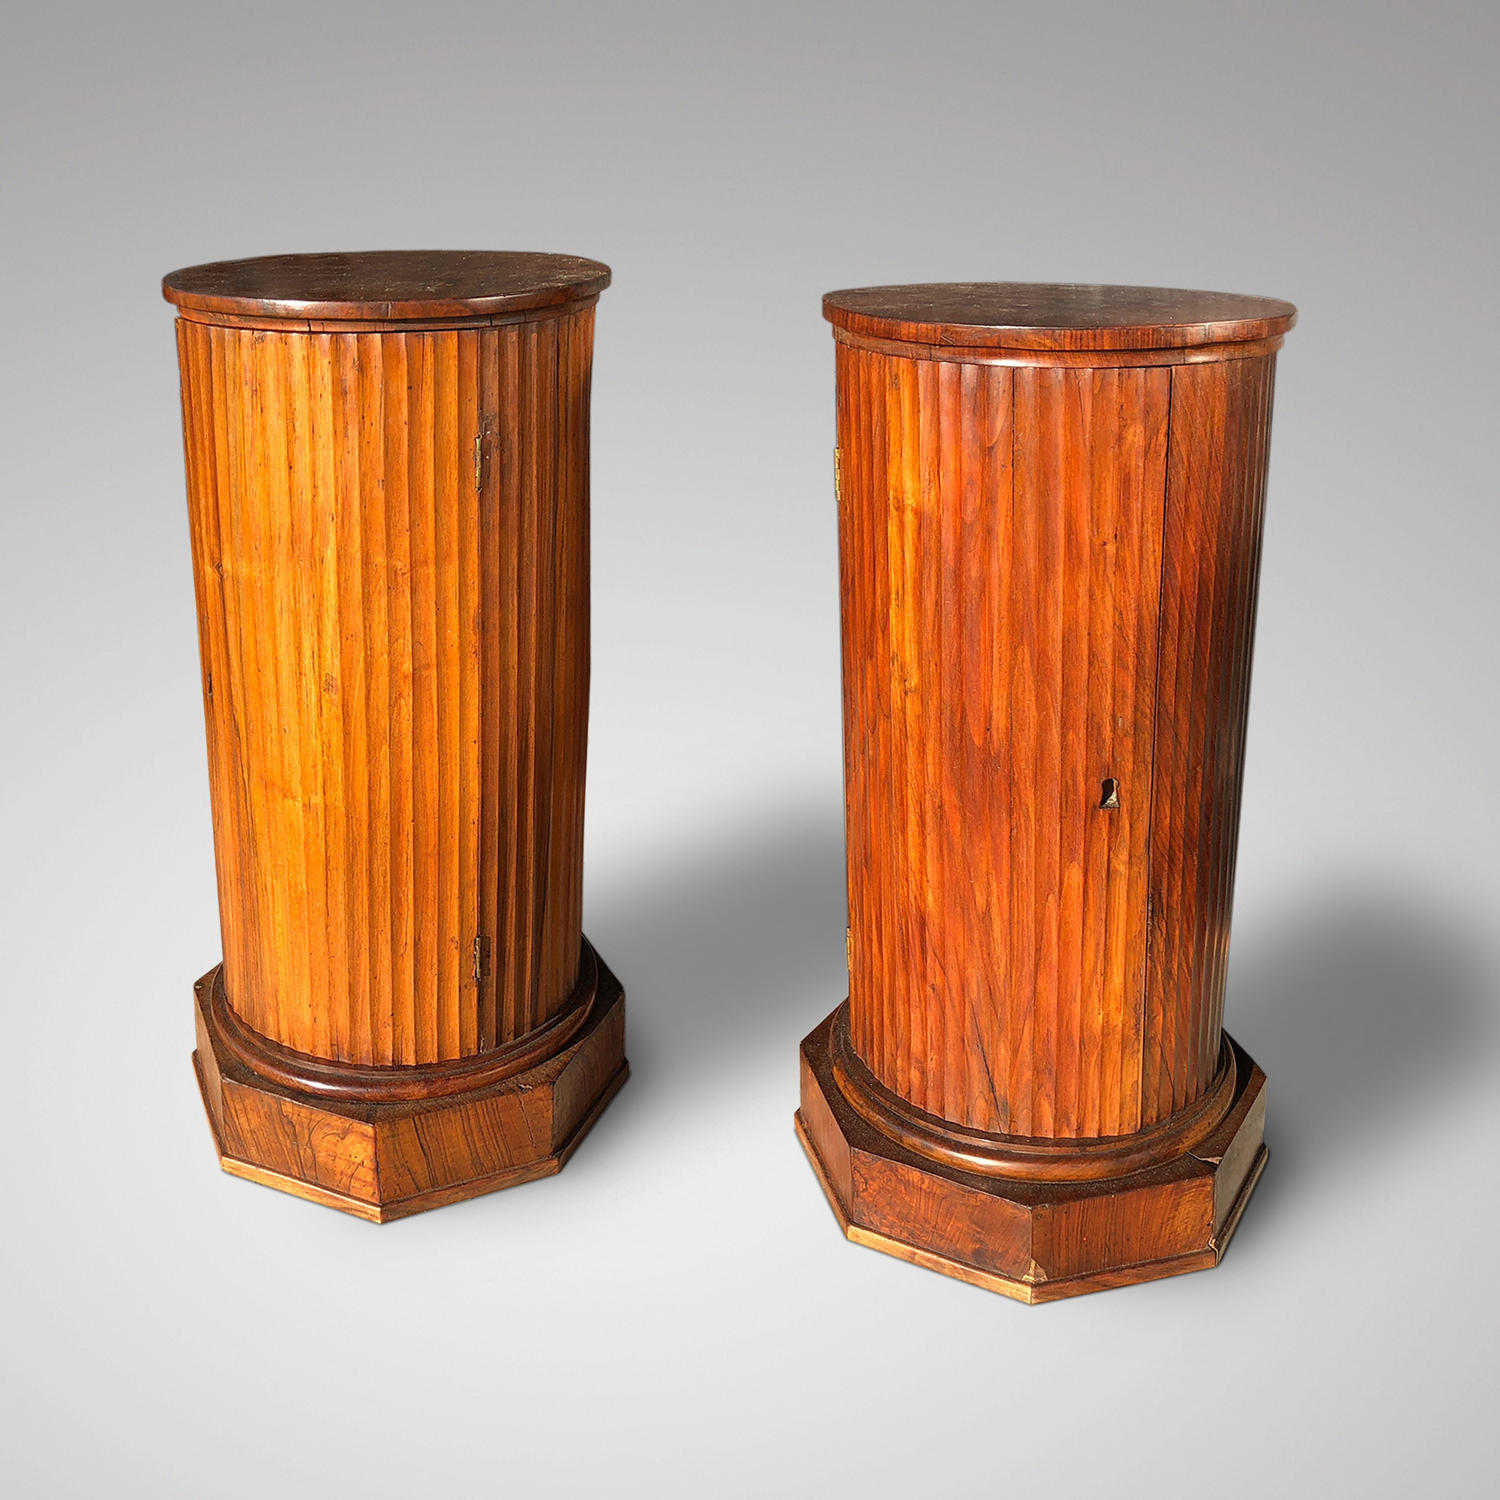 A PAIR OF EARLY 19TH CENTURY REEDED COLUMNS